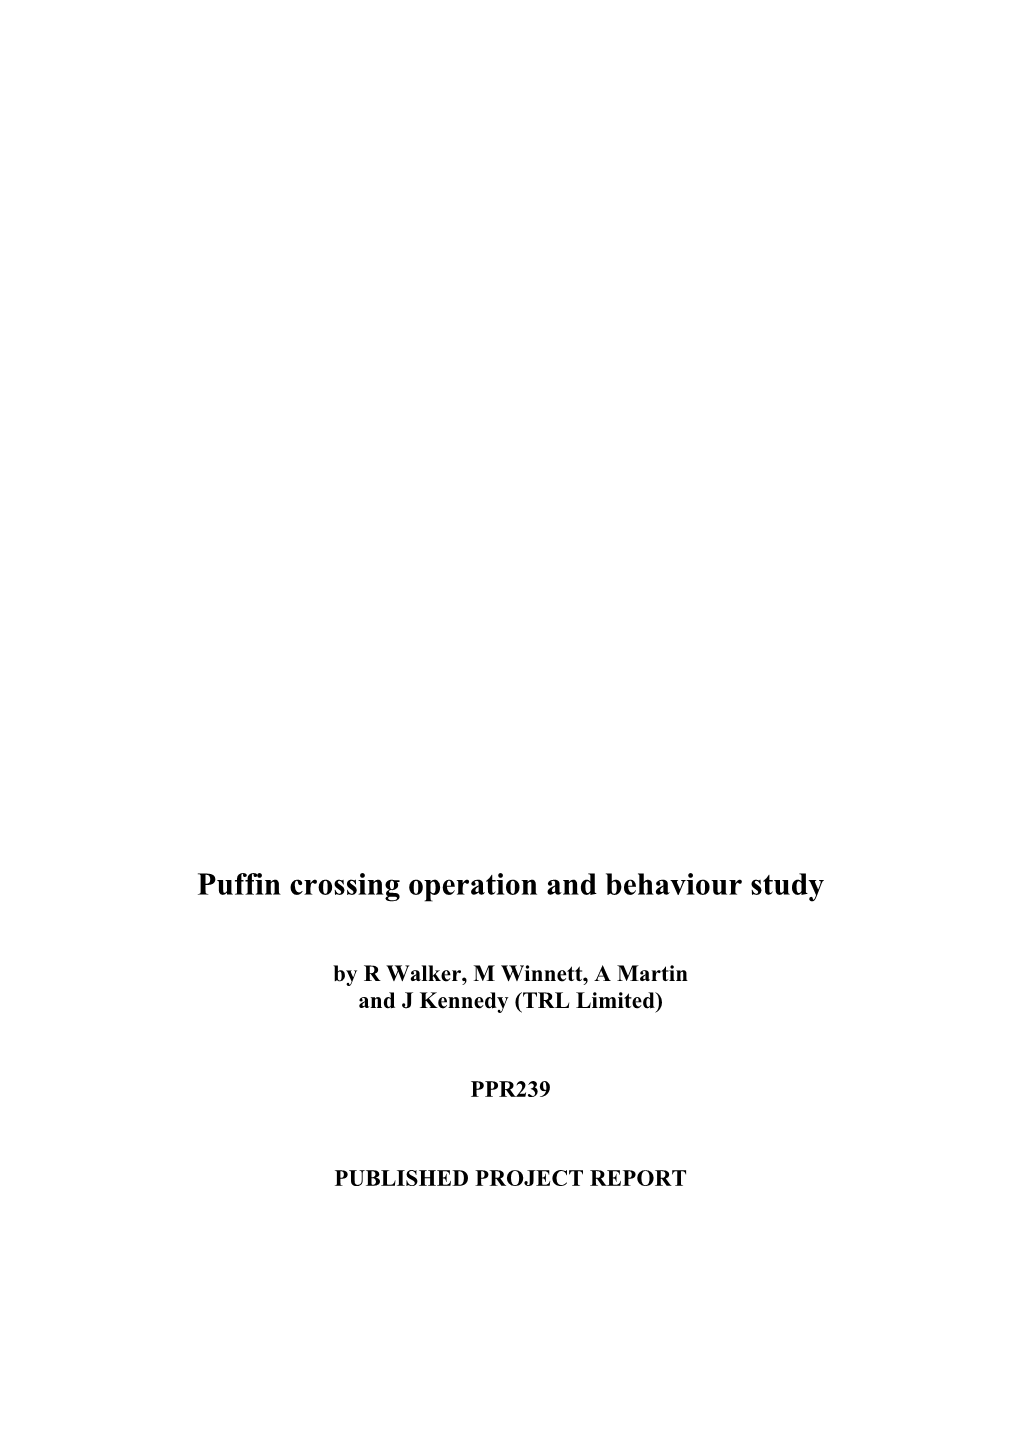 Puffin Crossing Operation and Behaviour Study